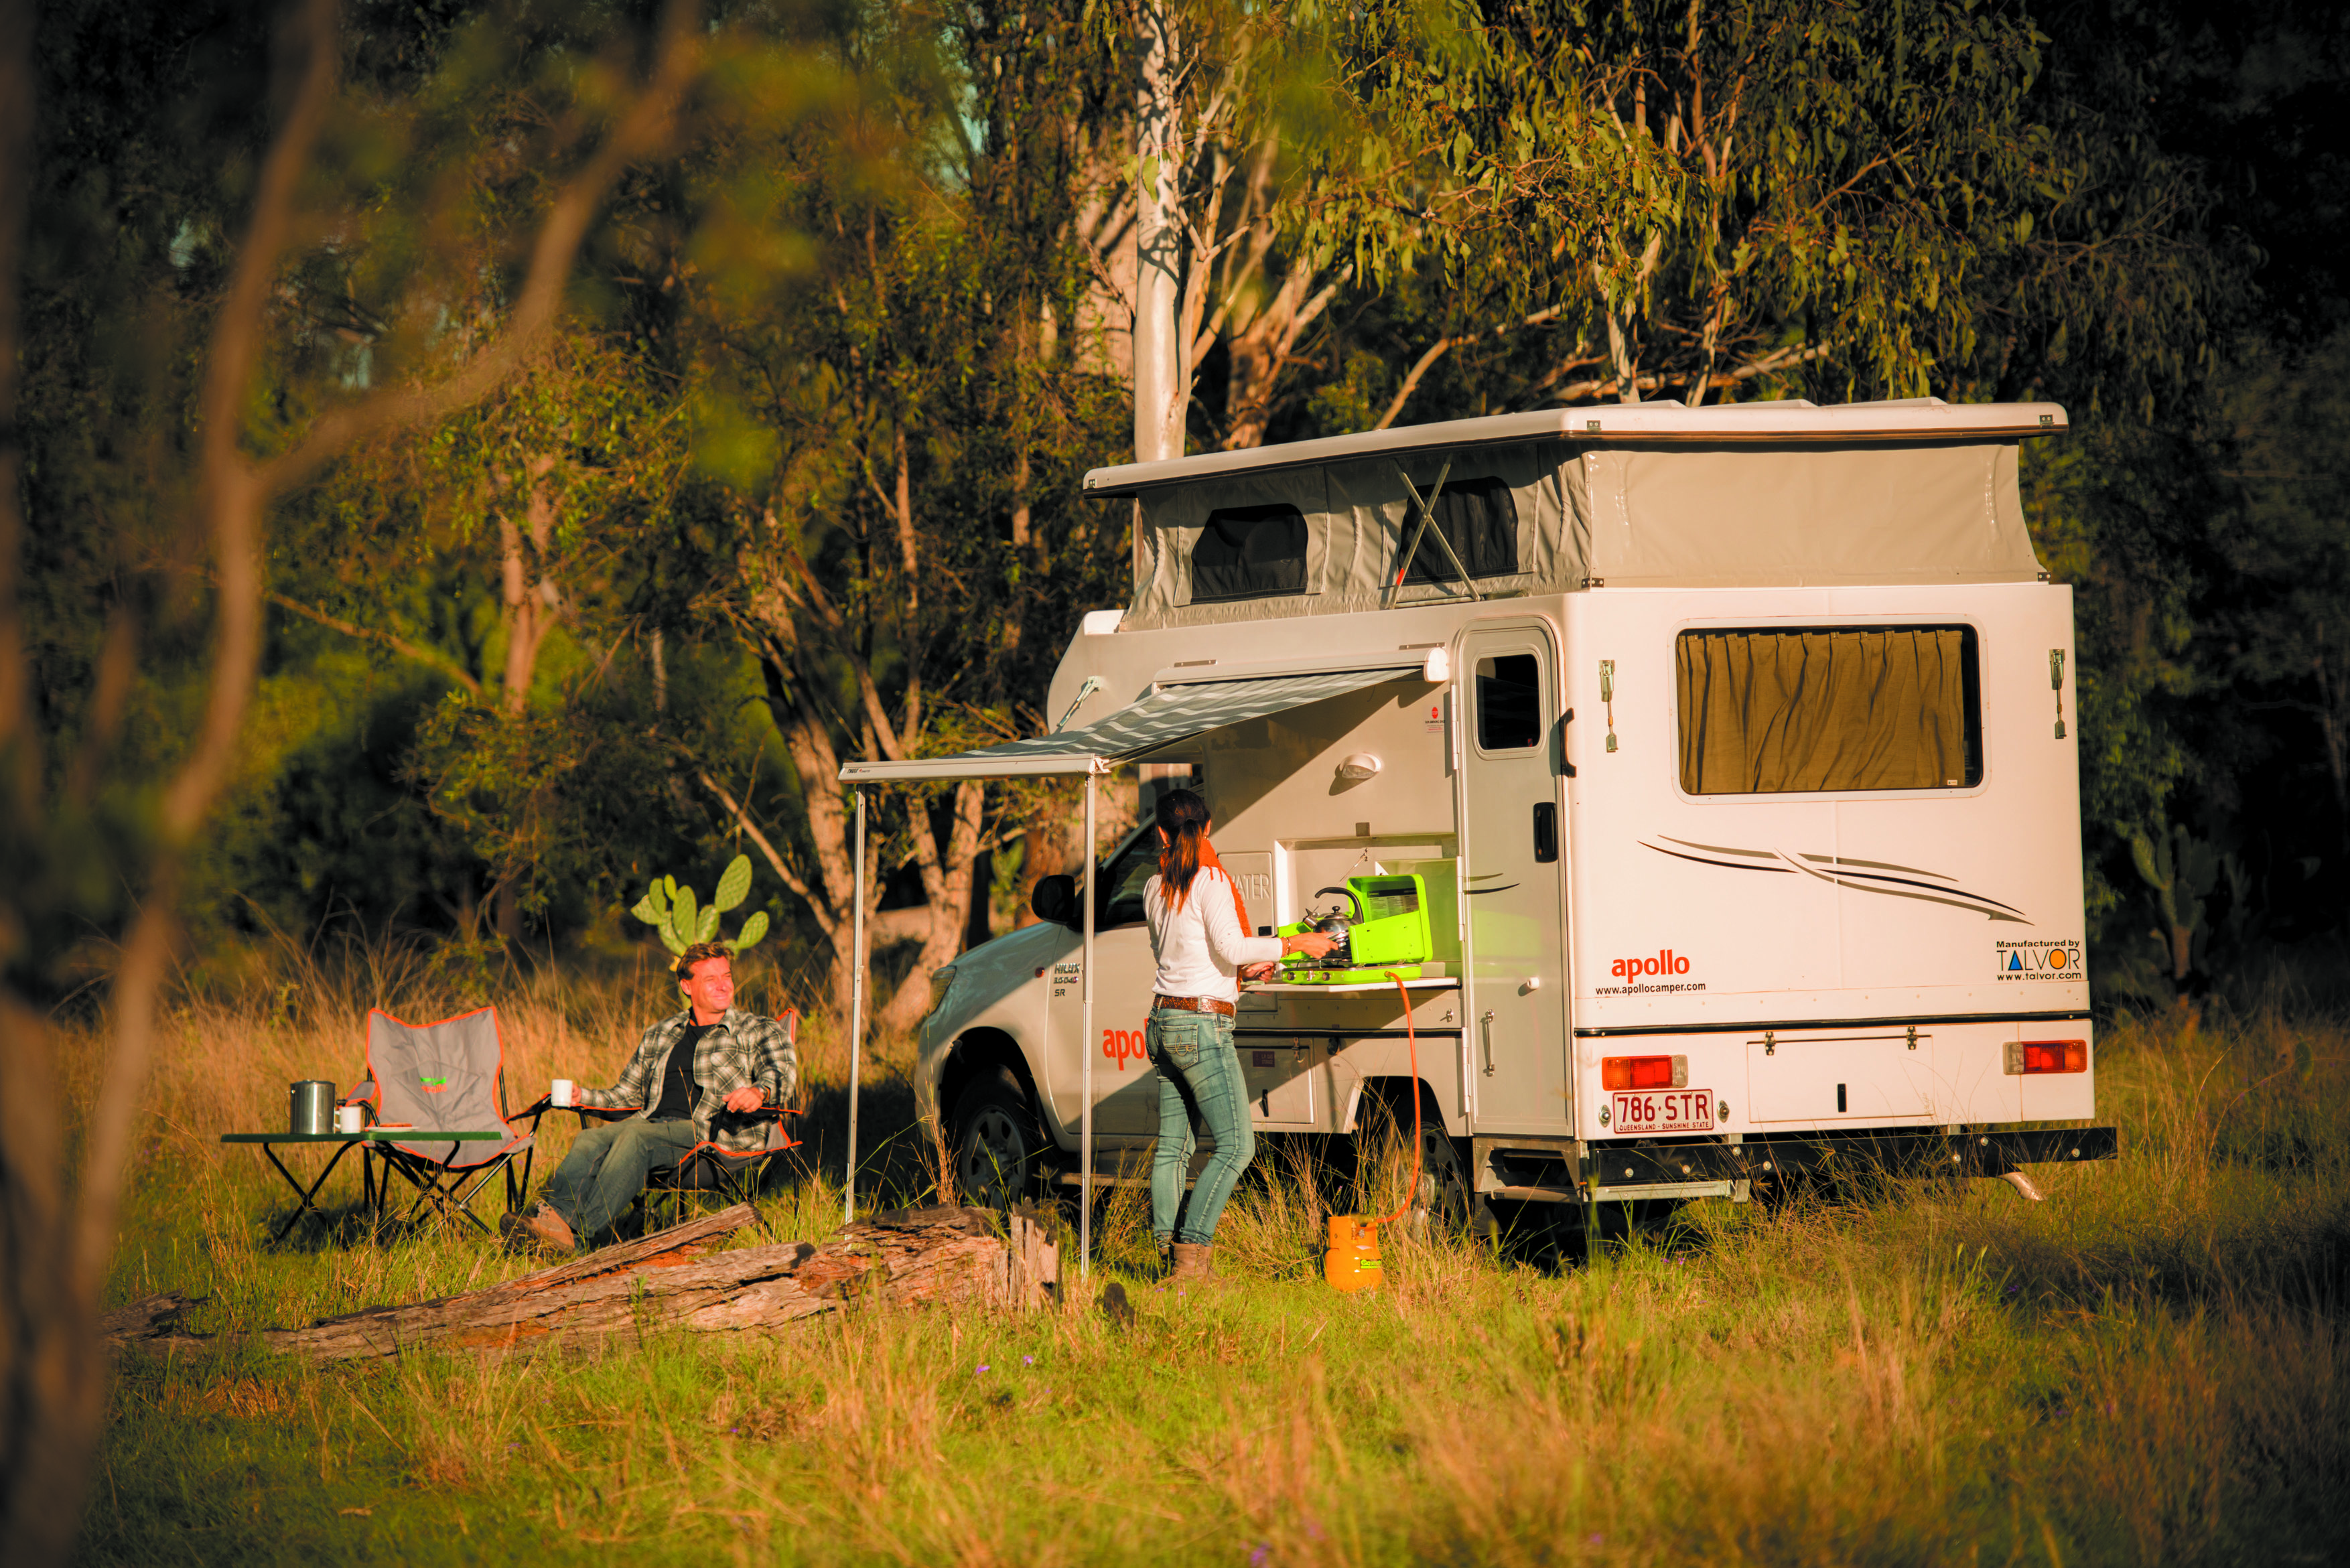 australian motorhome electric awning or manual which is best